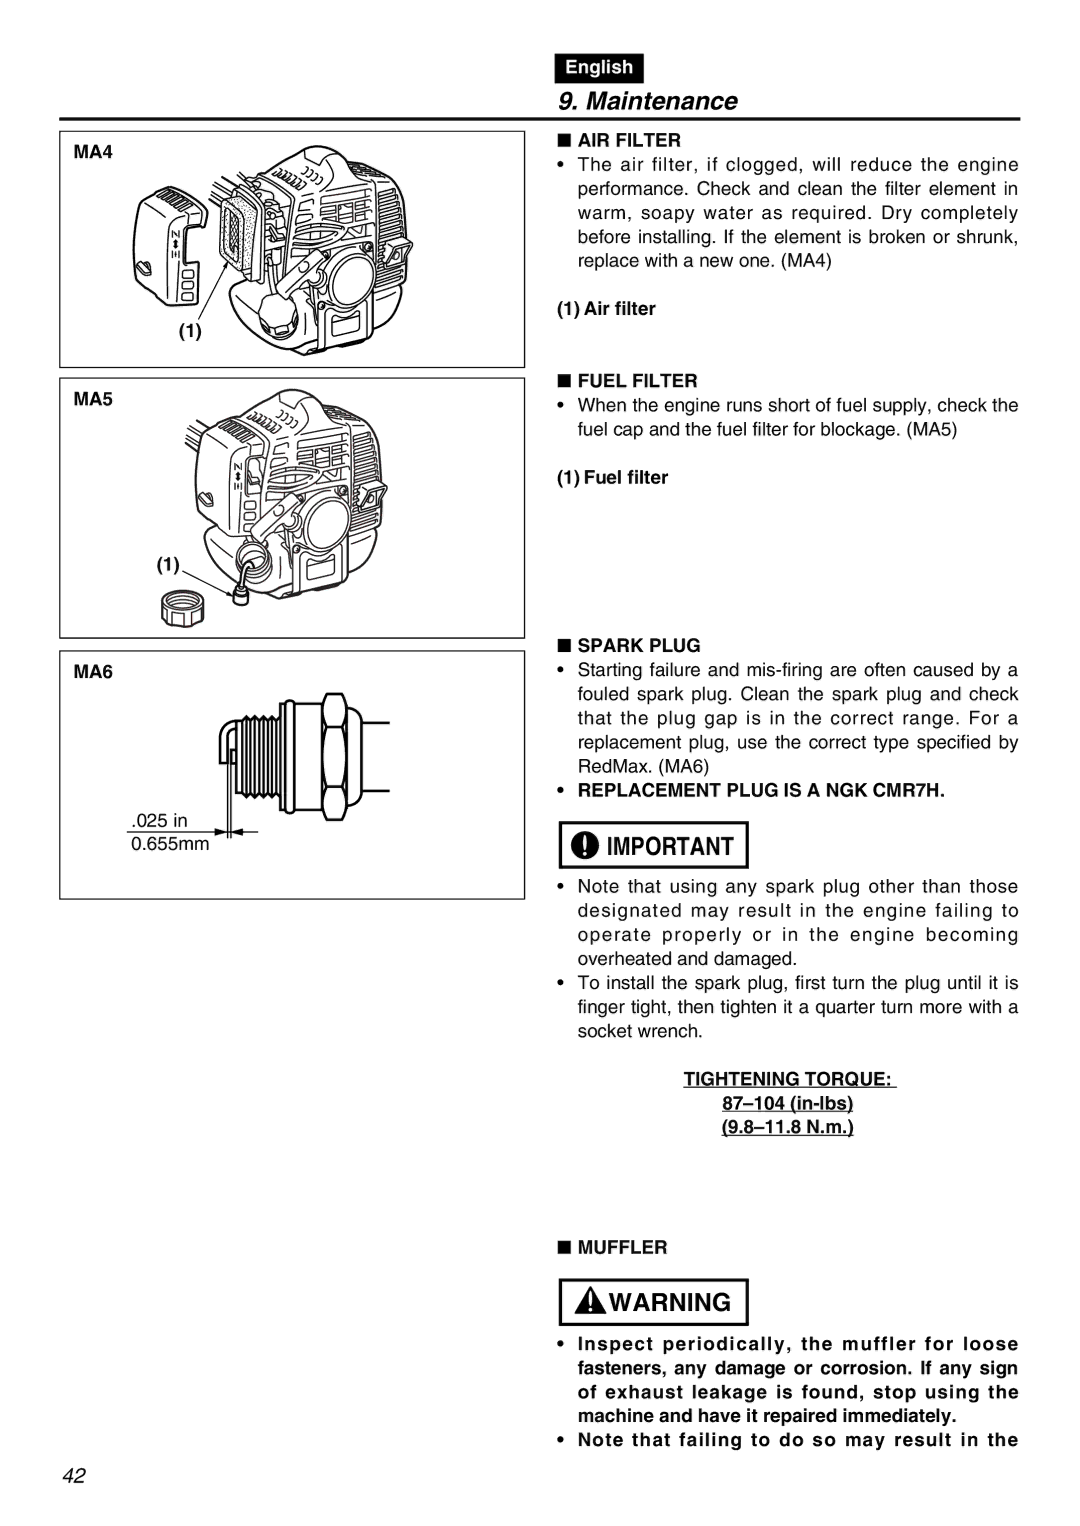 RedMax SGCZ2401S-CA MA4 MA5 MA6, AIR Filter, Fuel Filter, Spark Plug, Replacement Plug is a NGK CMR7H, Tightening Torque 